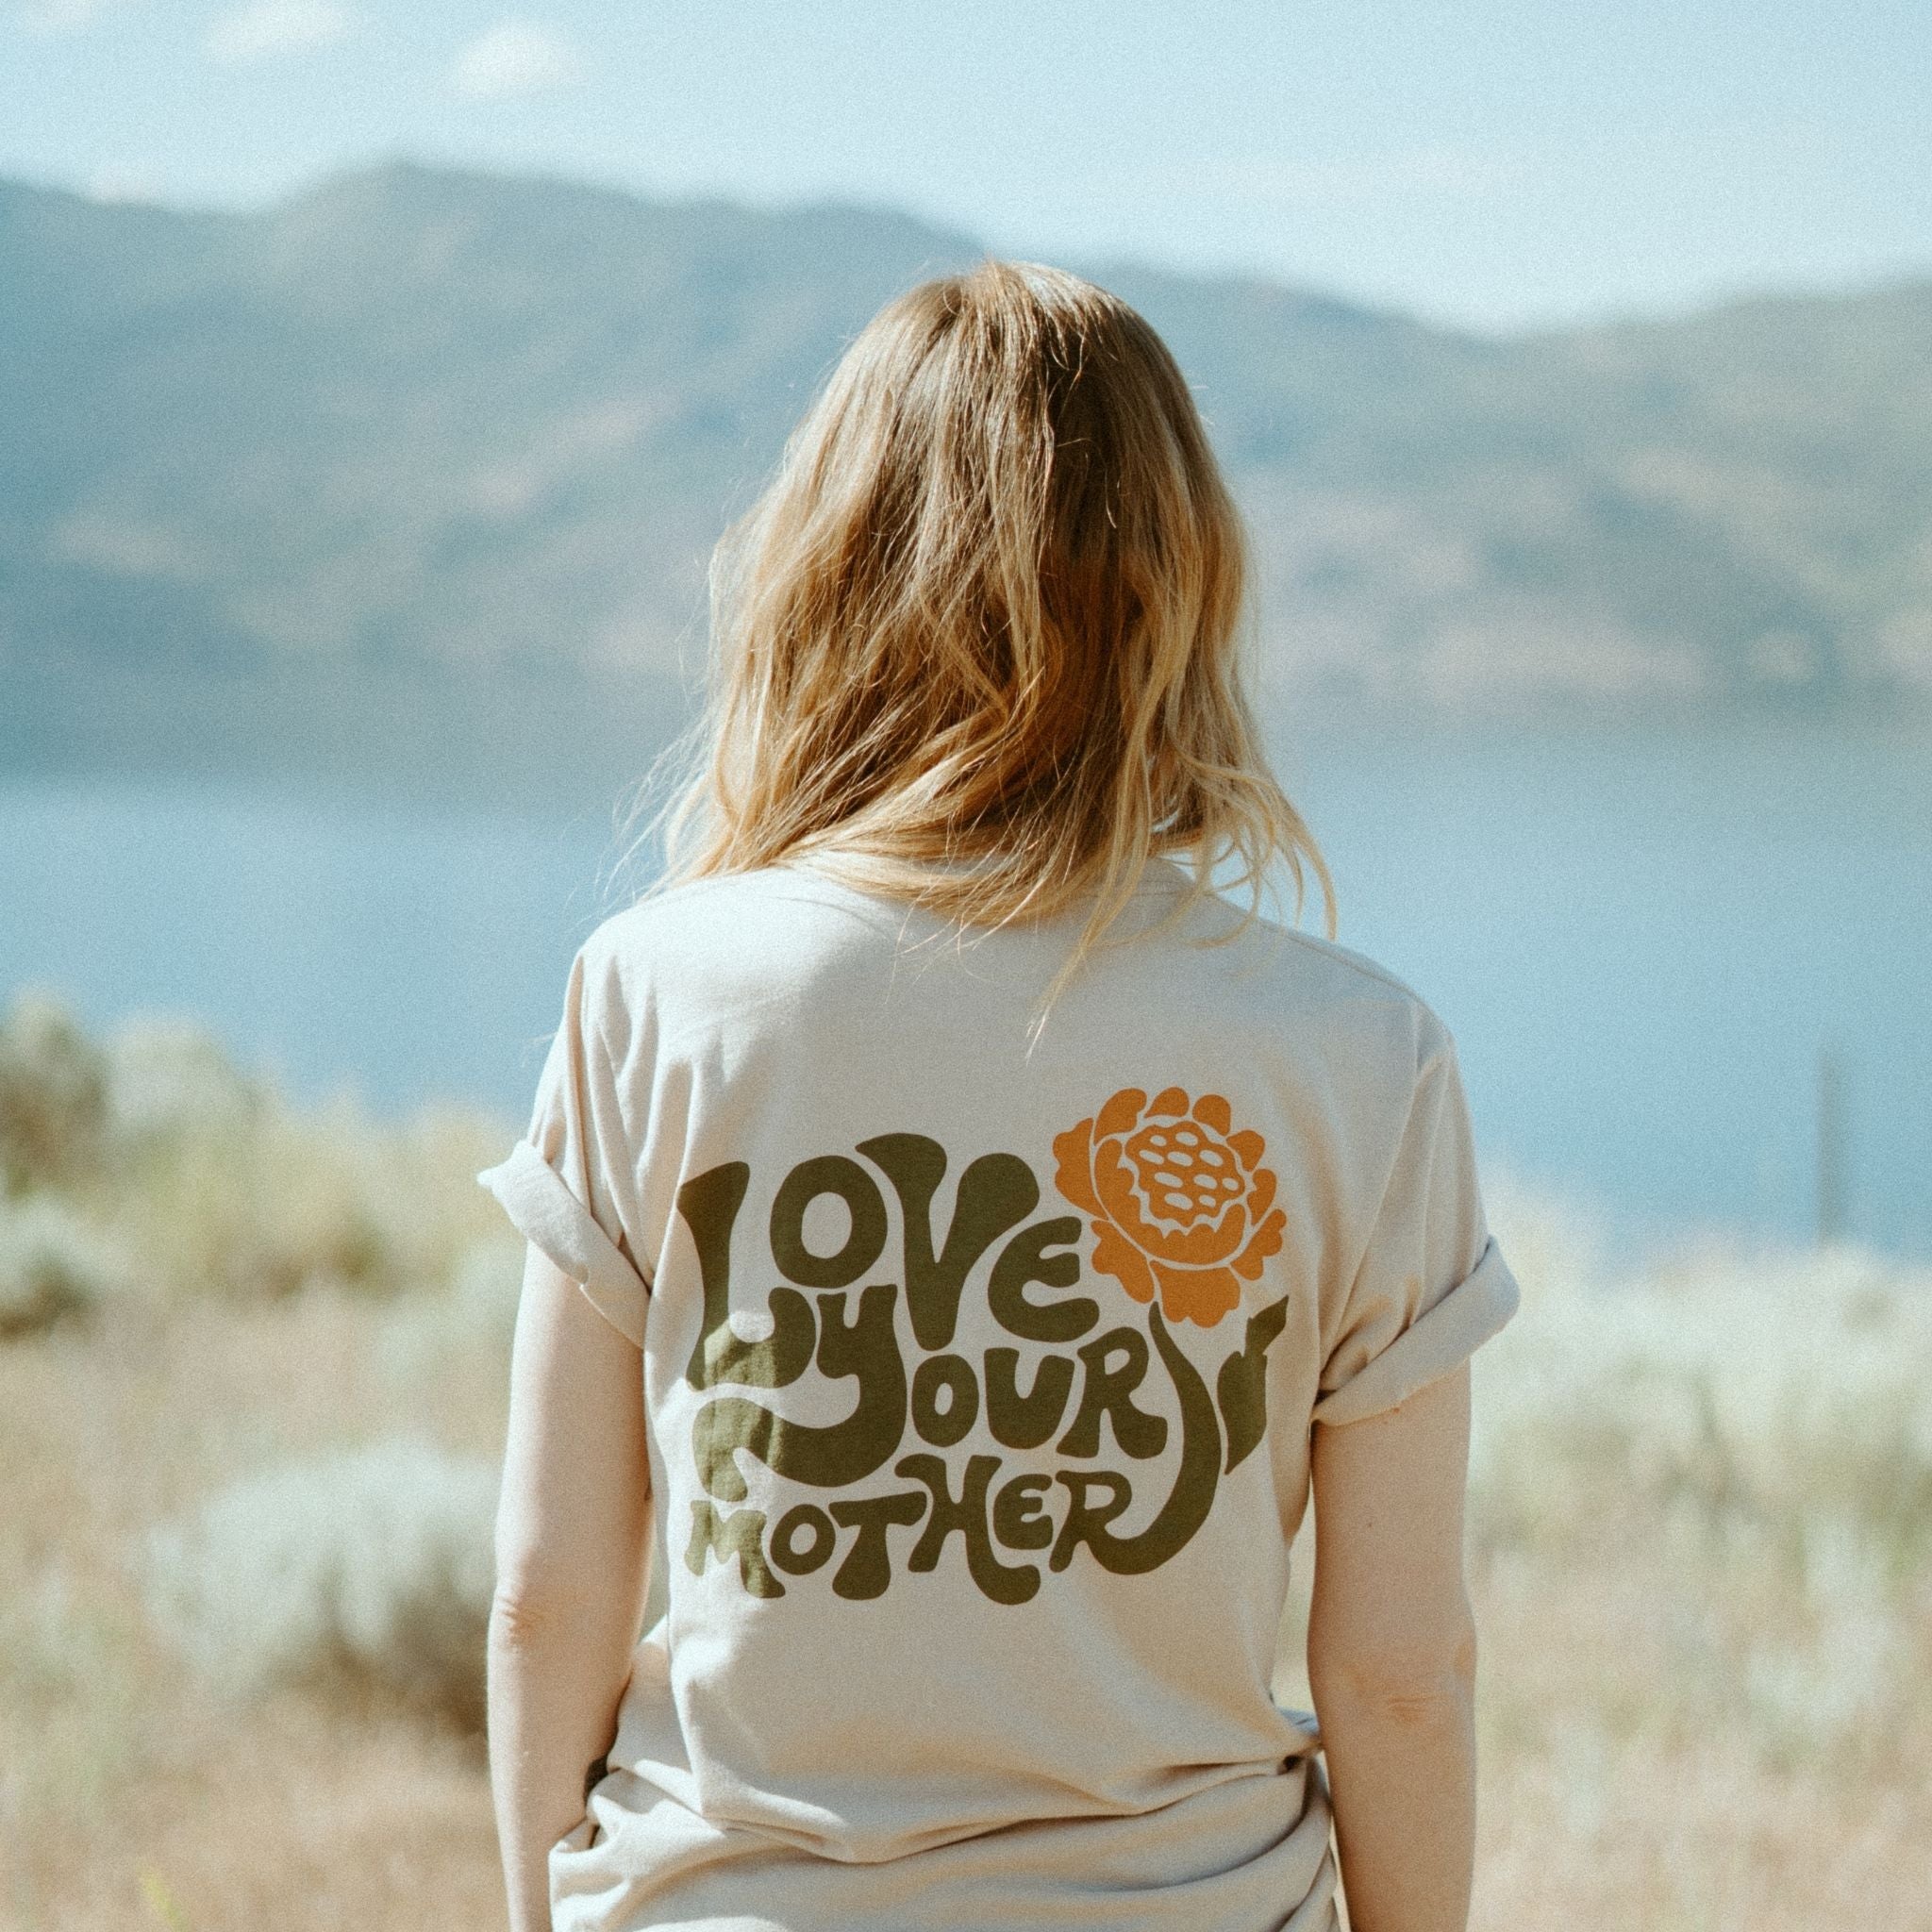 Be Kind Vibes love your mother tee and cropped top ethically made in the USA from 100% organic cotton